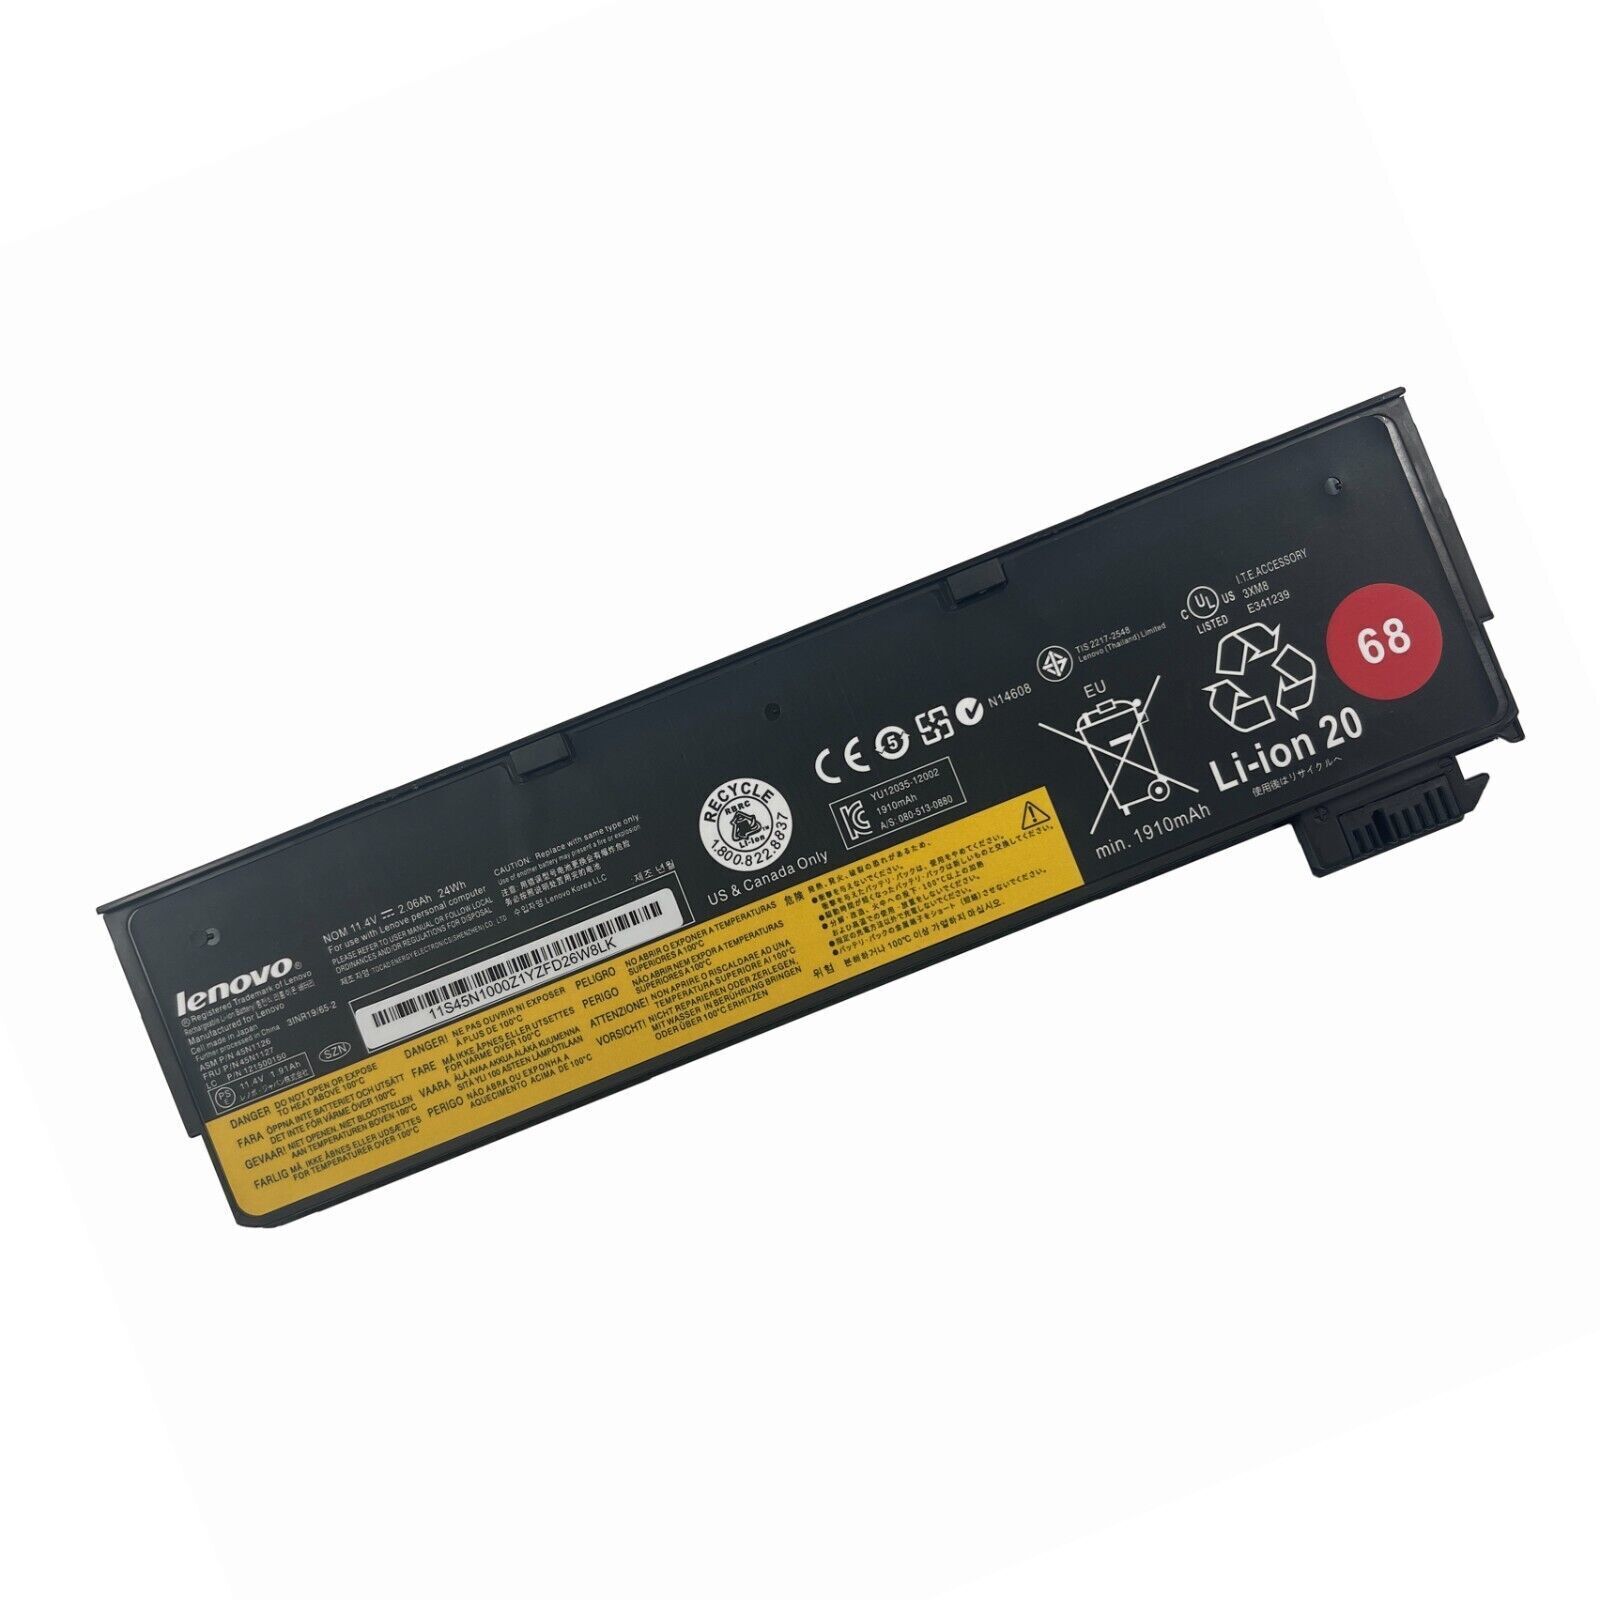 68 Genuine 24Wh 45N1125 Battery For Lenovo ThinkPad X240 X250 X260 T440s T450s